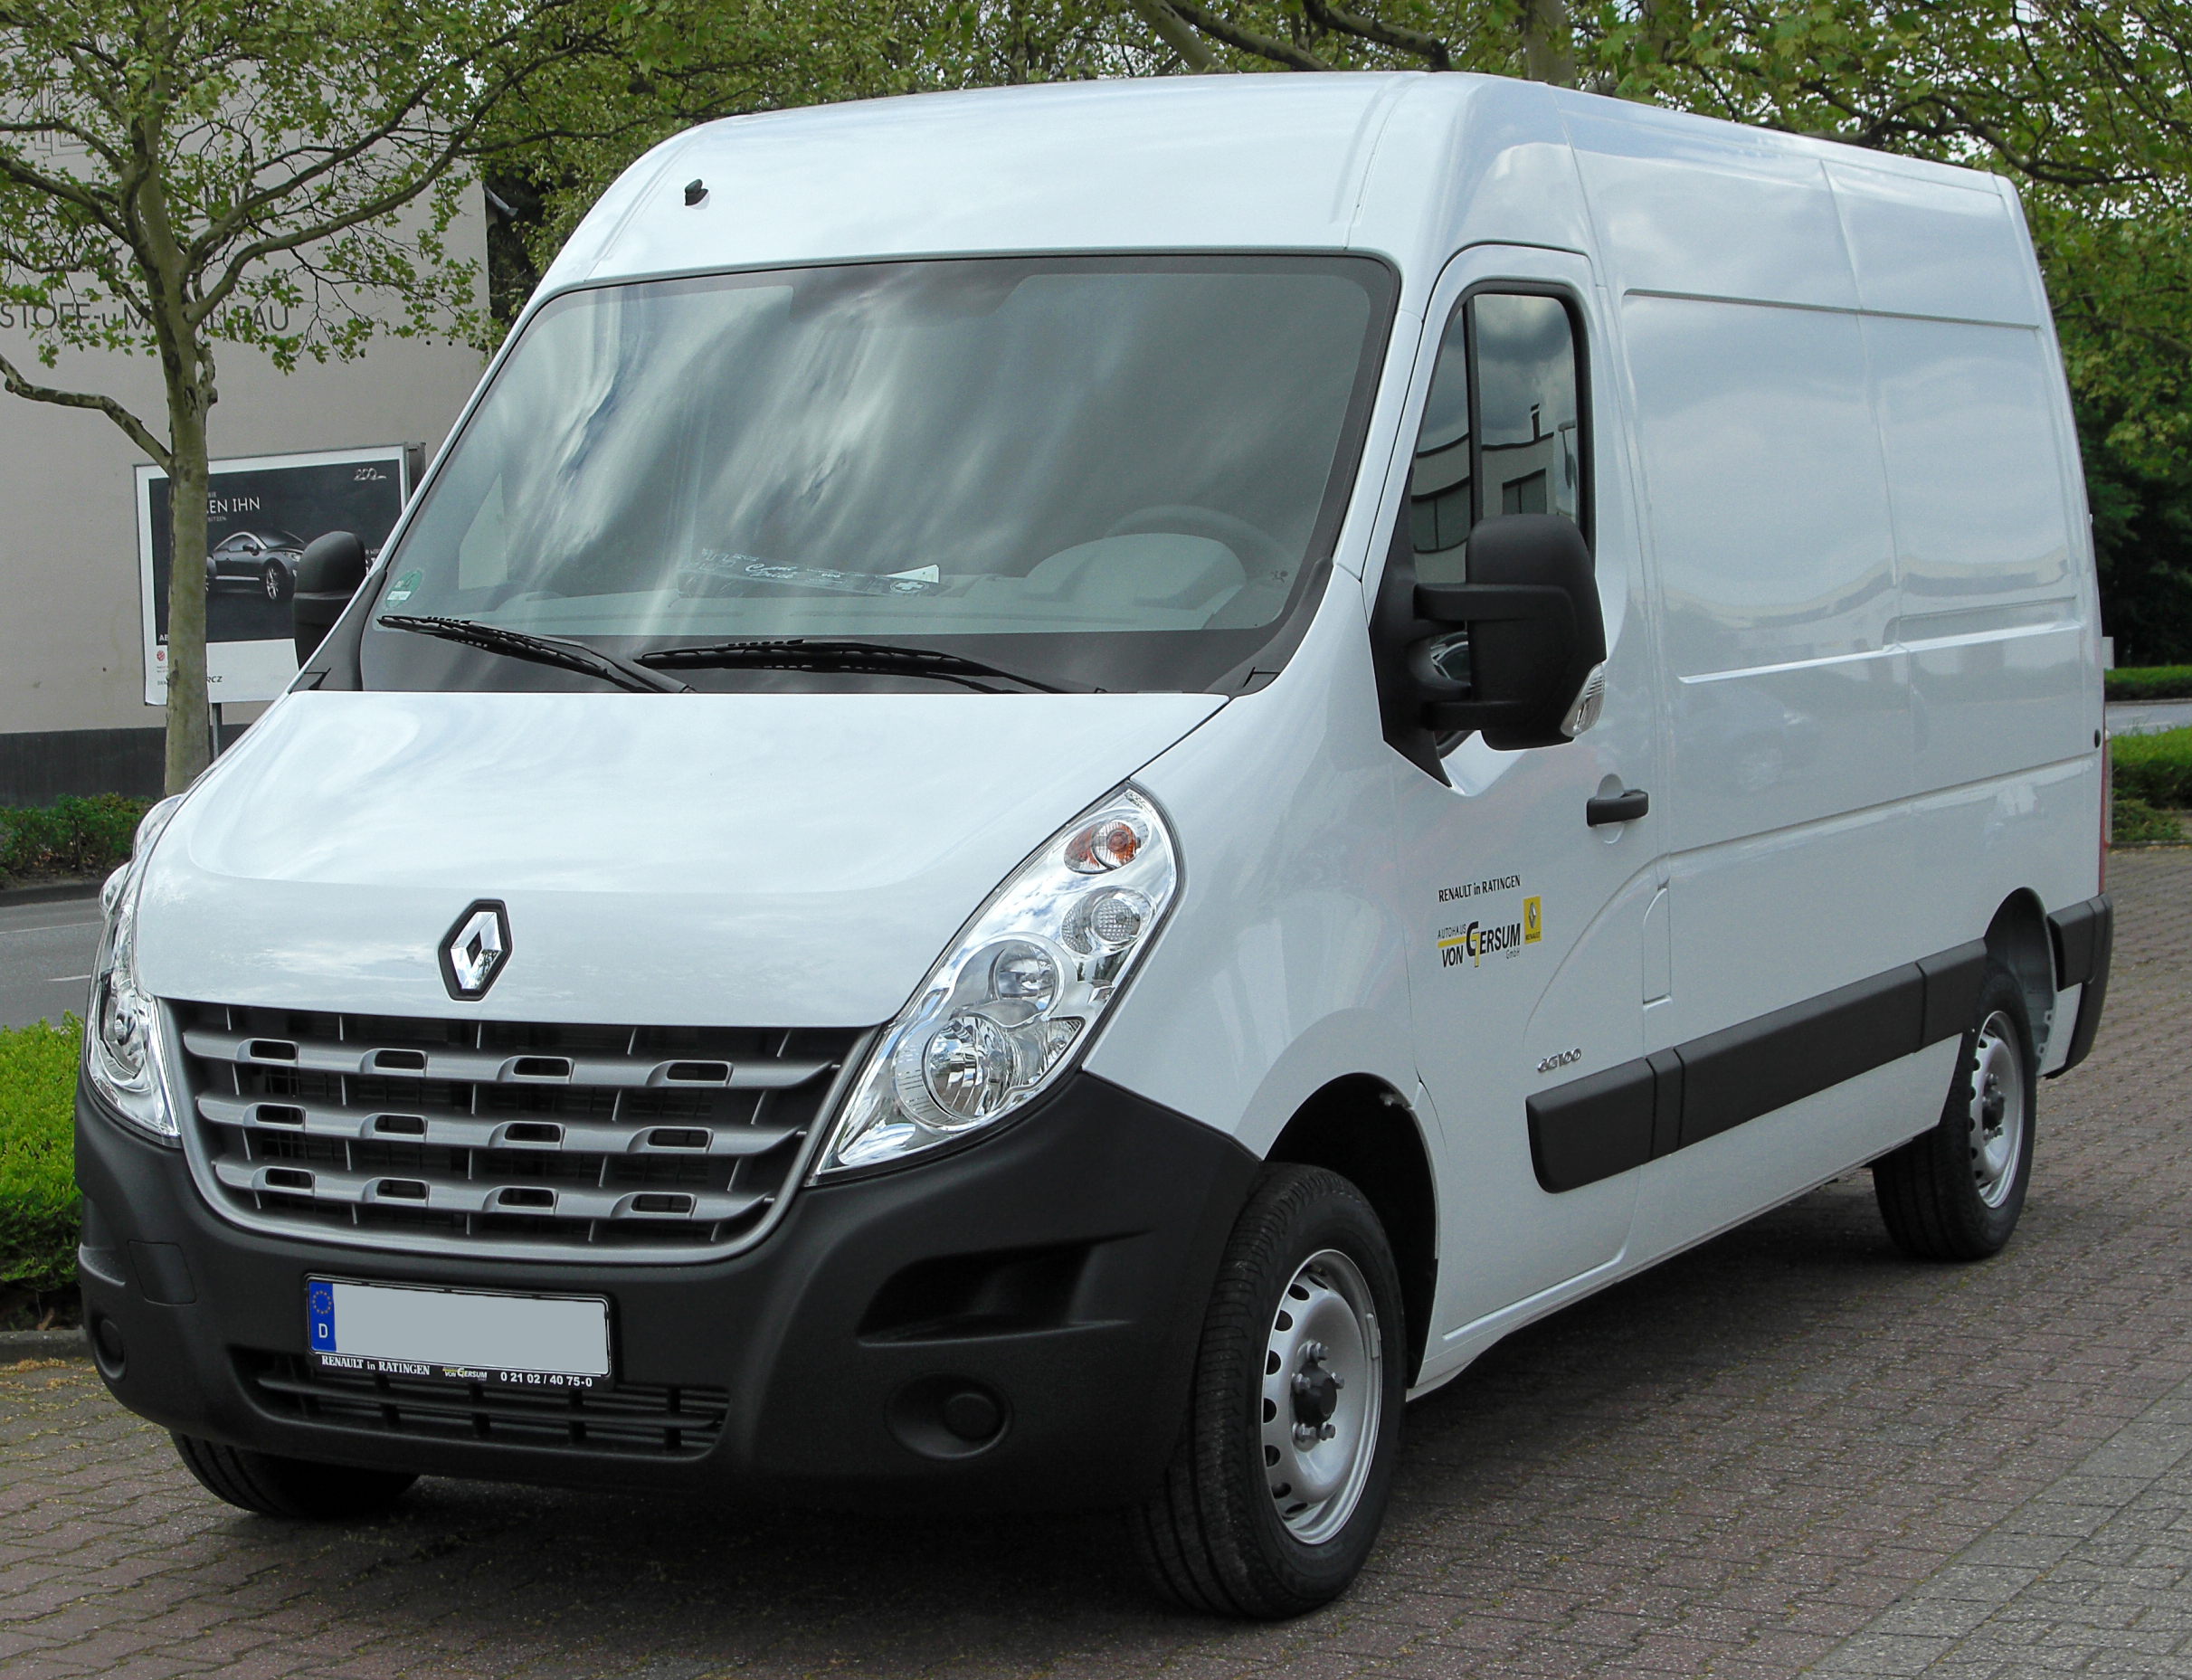 Renault Master, Tractor & Construction Plant Wiki